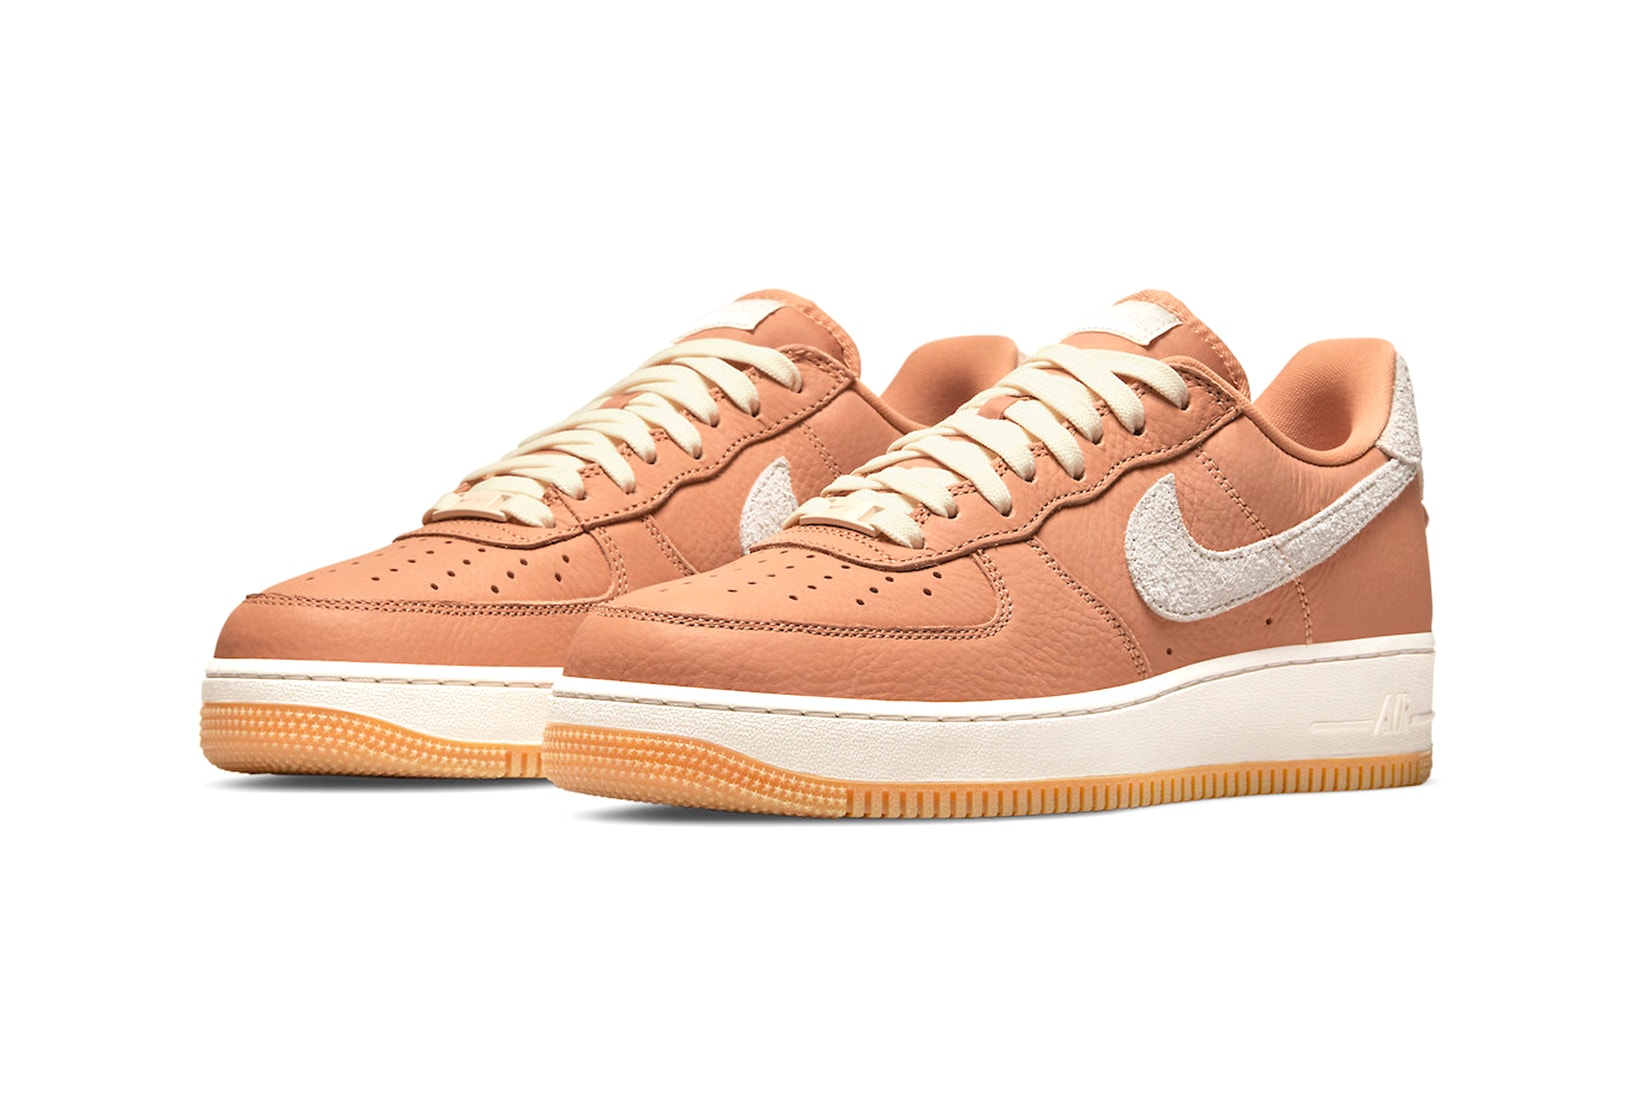 Nike Air Force 1 Craft Sneakers Beige Gum Price Release Date Product Shot